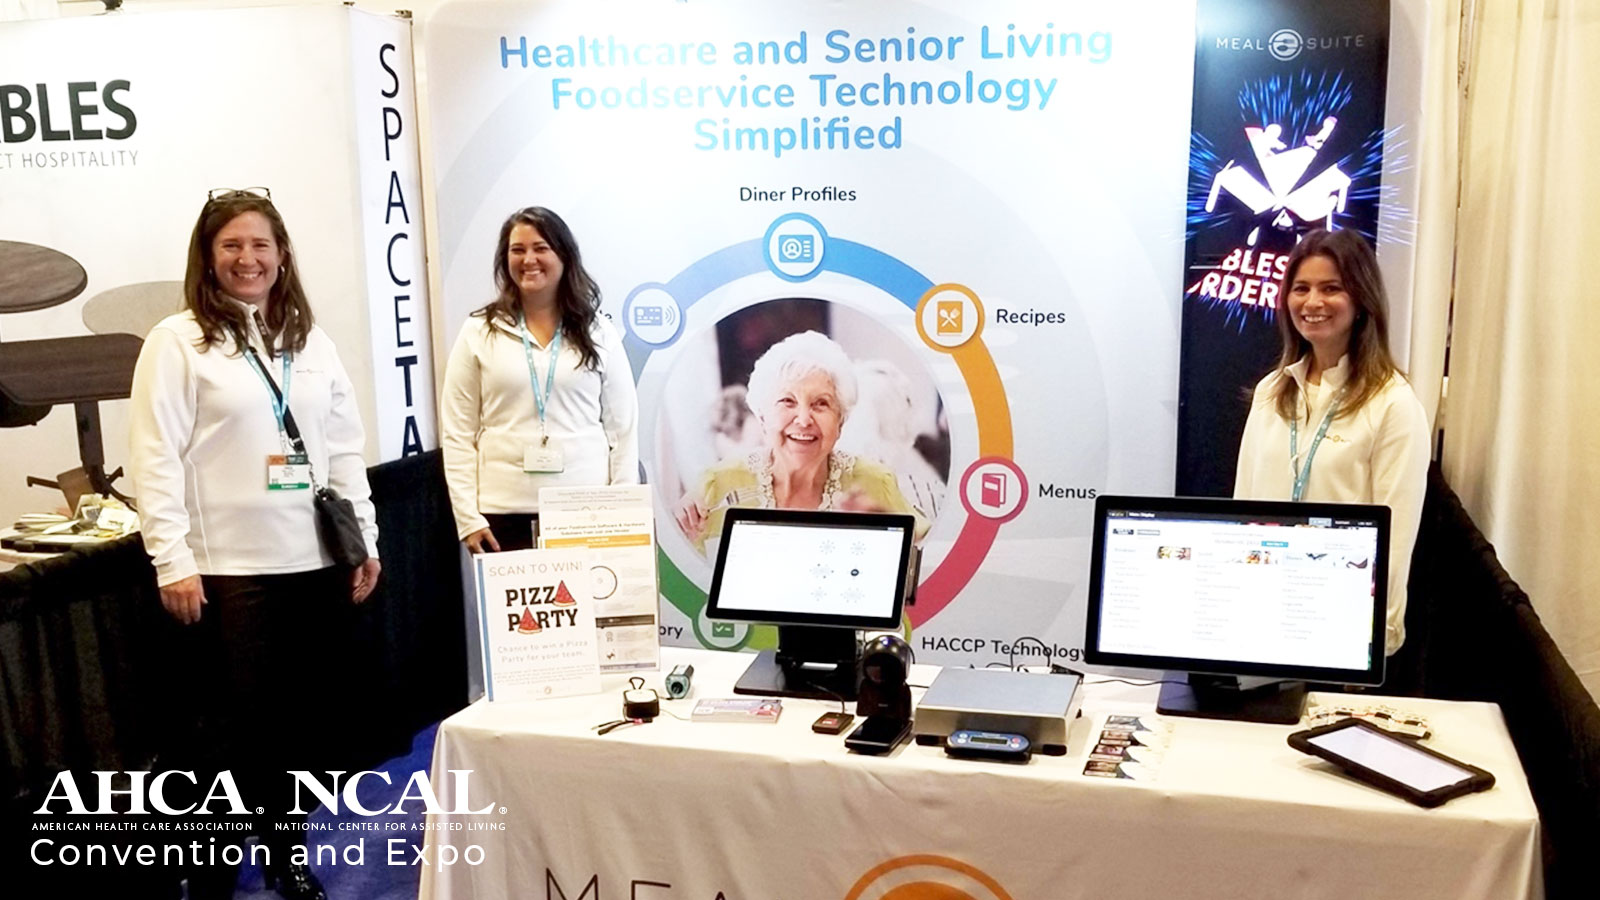 MealSuite at AHCA/NCAL Expo